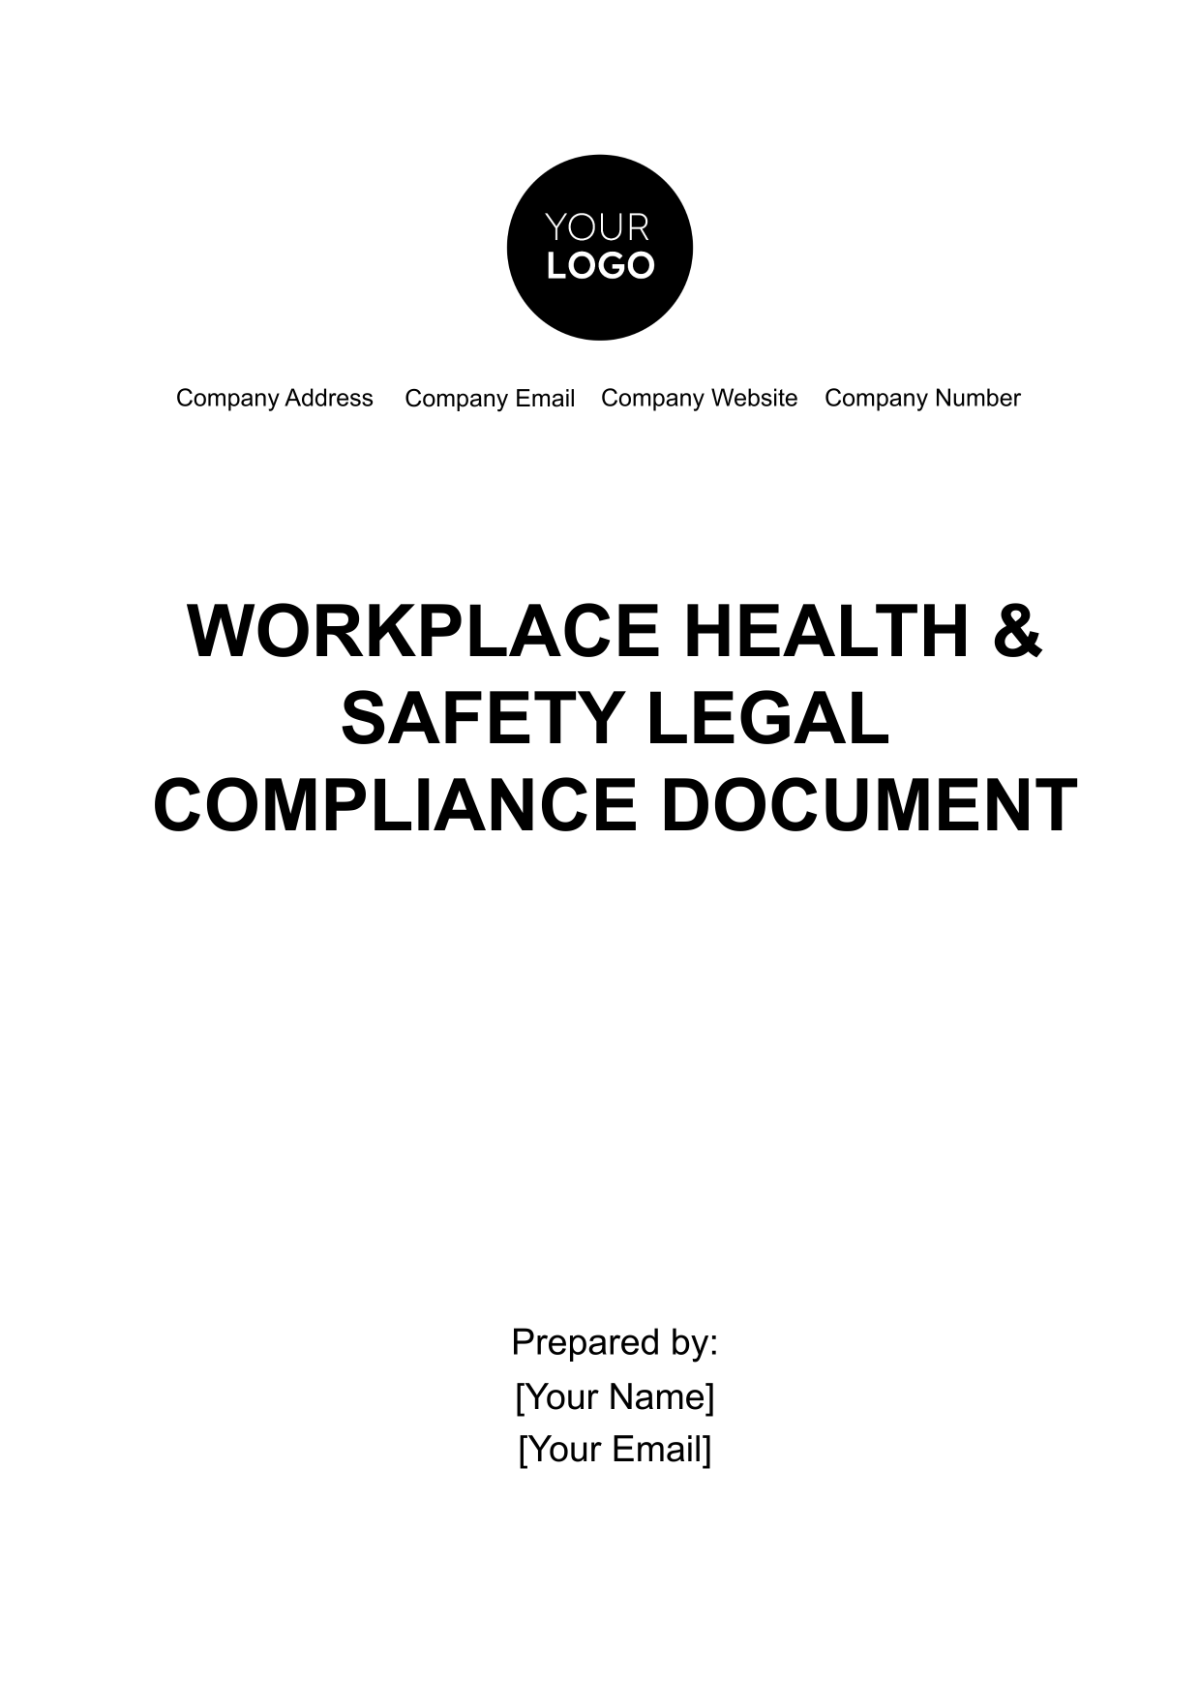 Free Workplace Health & Safety Legal Compliance Document Template